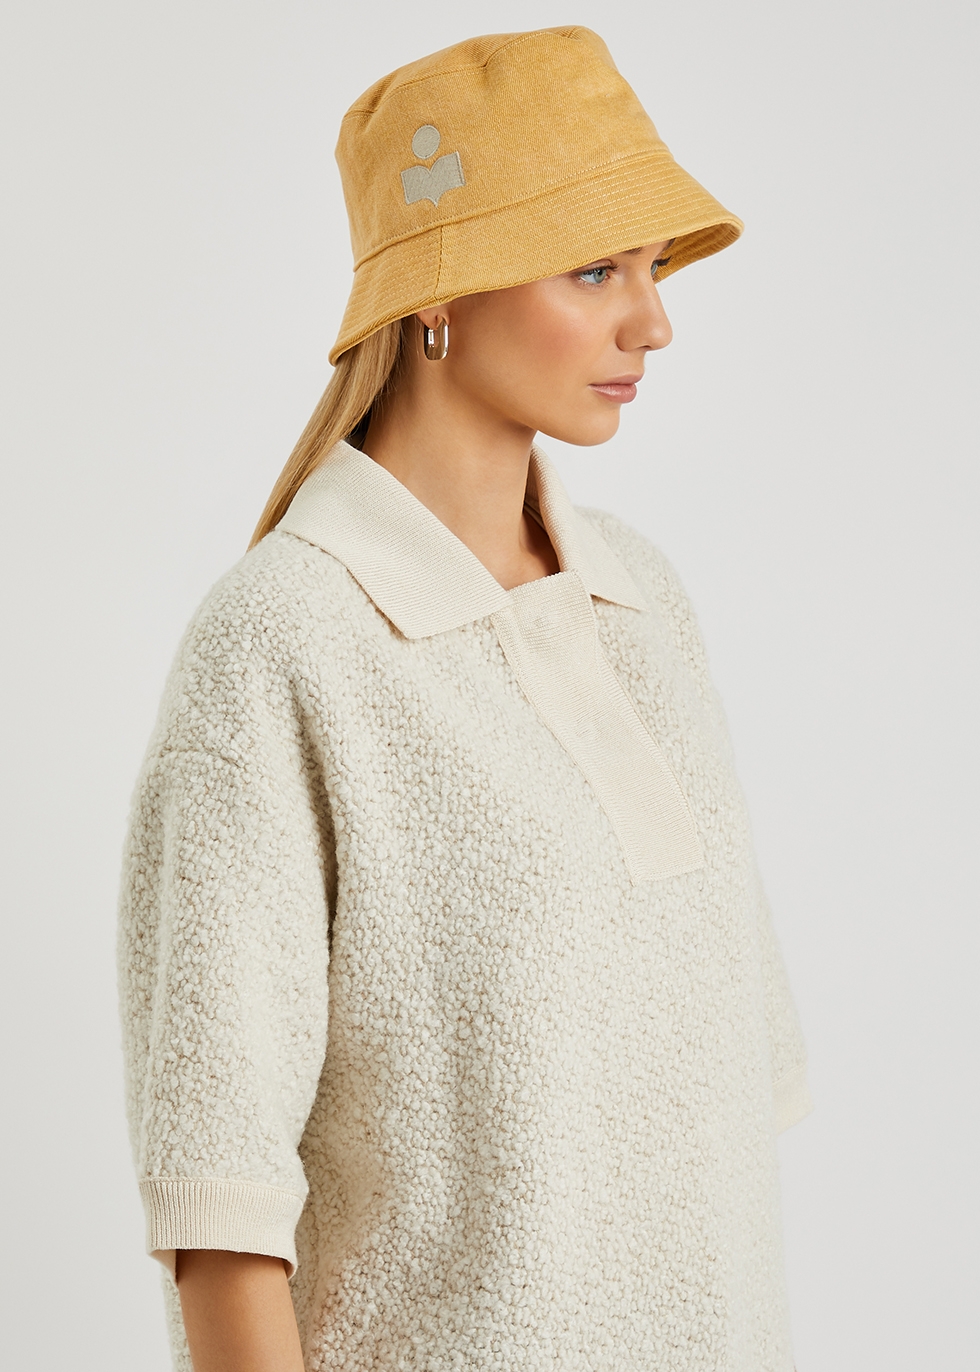 Isabel Marant Synthetic Logo Embroidered Bucket Hat in Yellow Womens Accessories Hats 